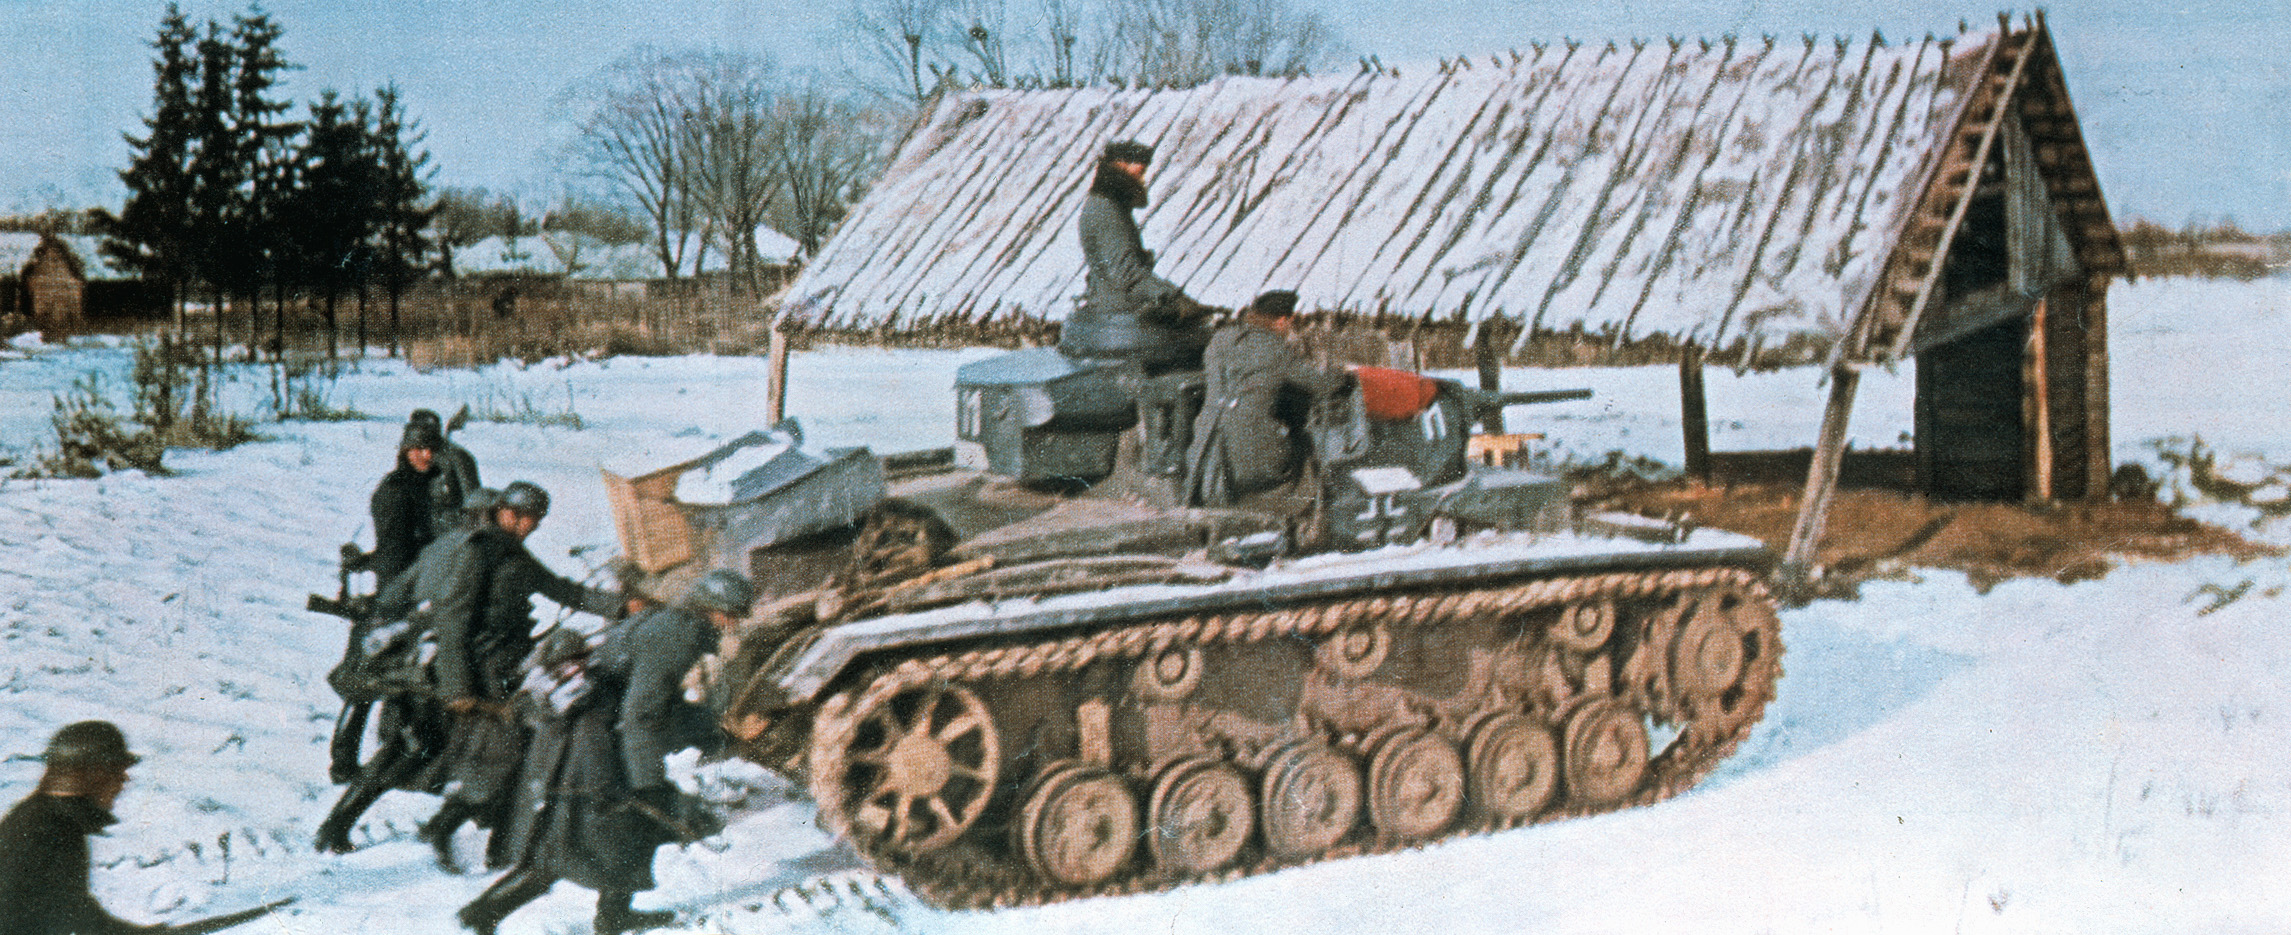 German soldiers and tanks on the offensive in Russia during the winter of 1942 move across the snowy landscape of a Russian village. This photo first appeared in Signal, a magazine published for members of the German military.